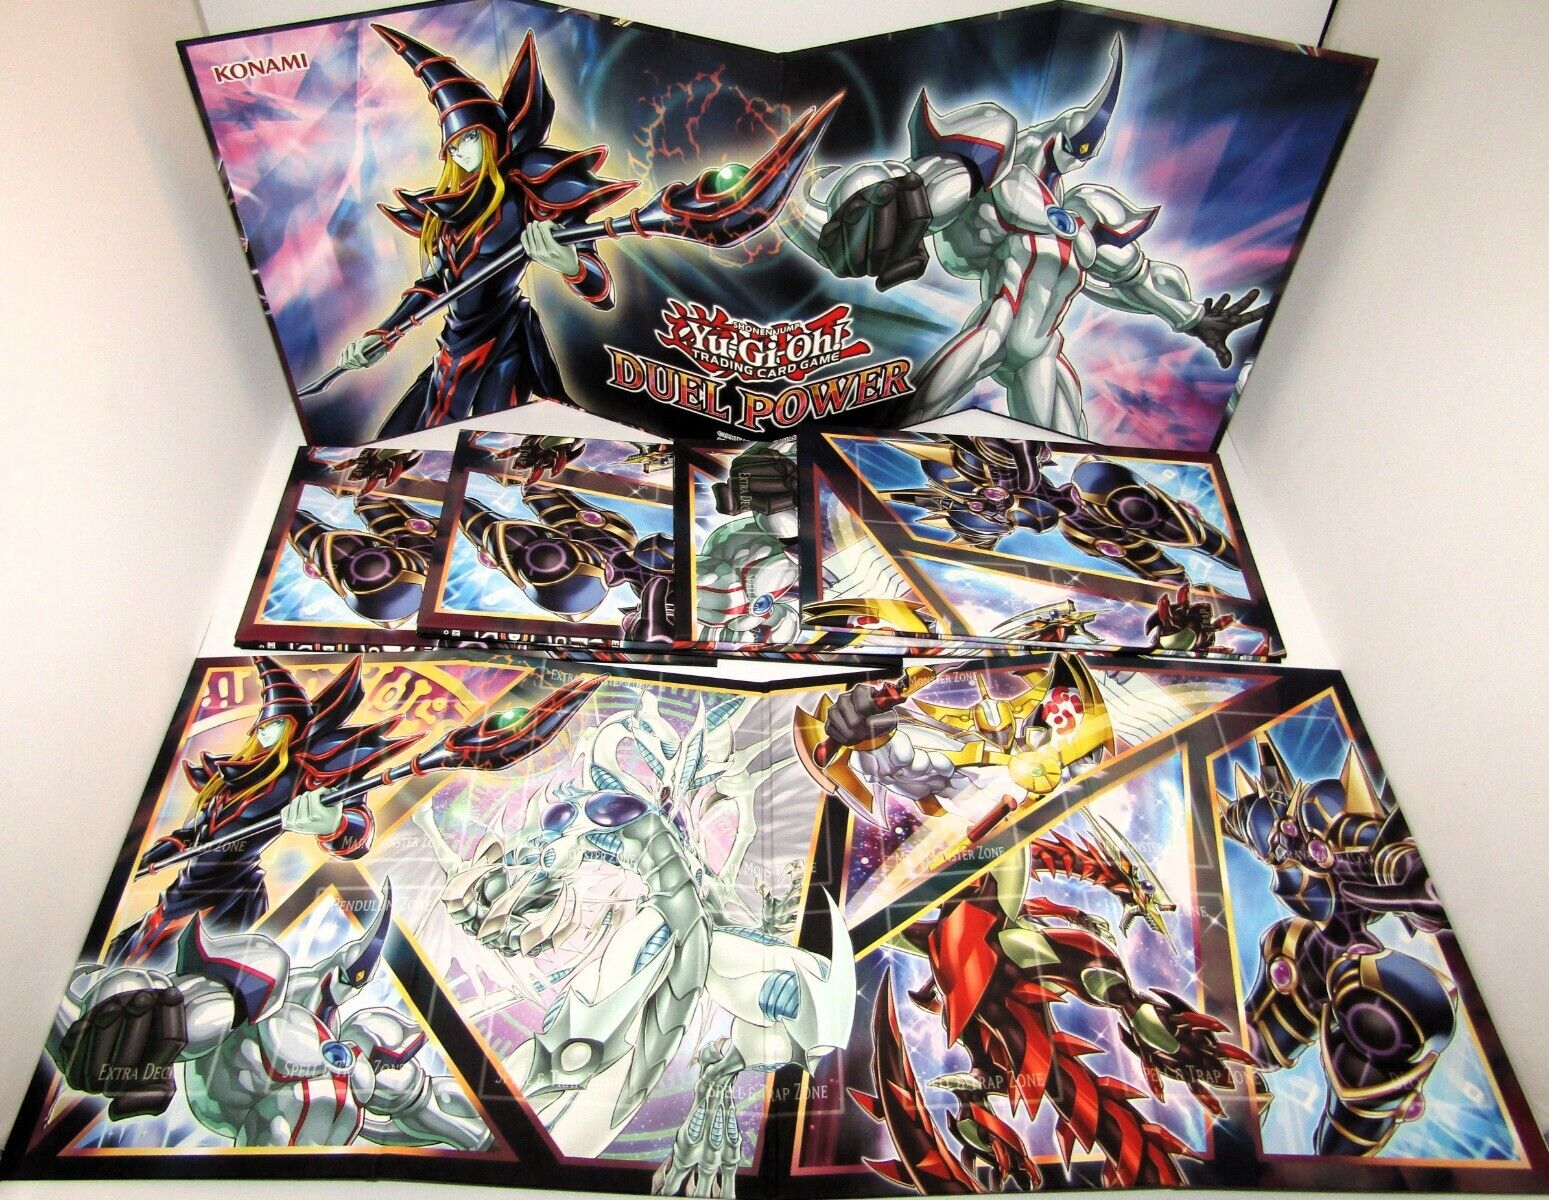 2017 Yu-Gi-Oh Hard Cover Gaming Boards Shonen Jump Duel Power Lot of 6 Brand New